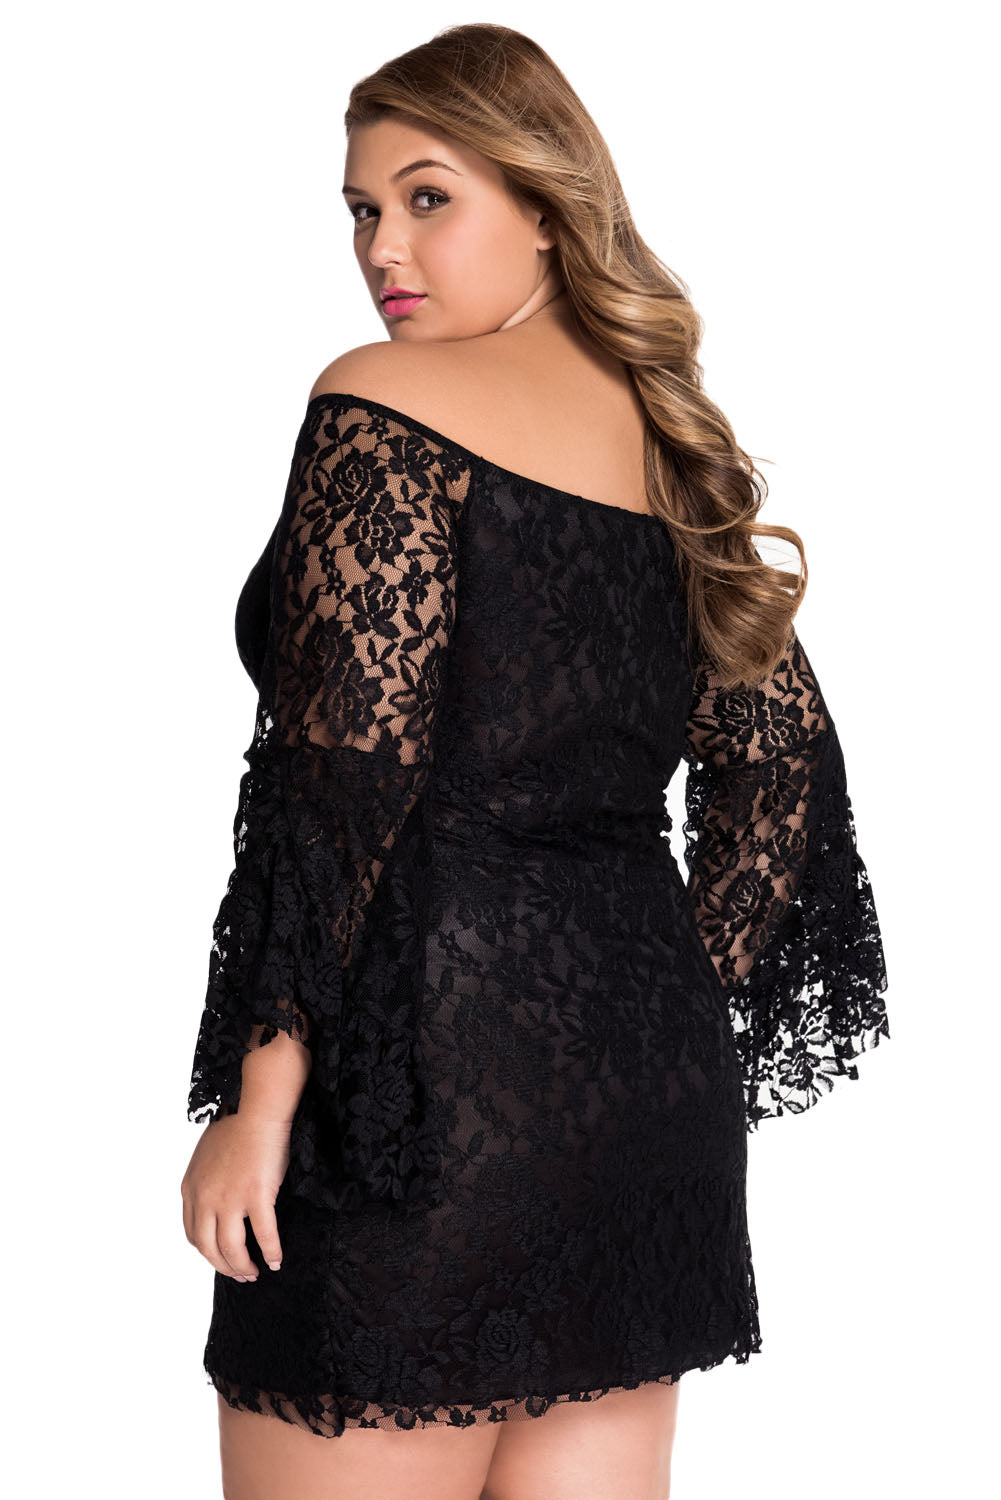 sexy plus size clothes